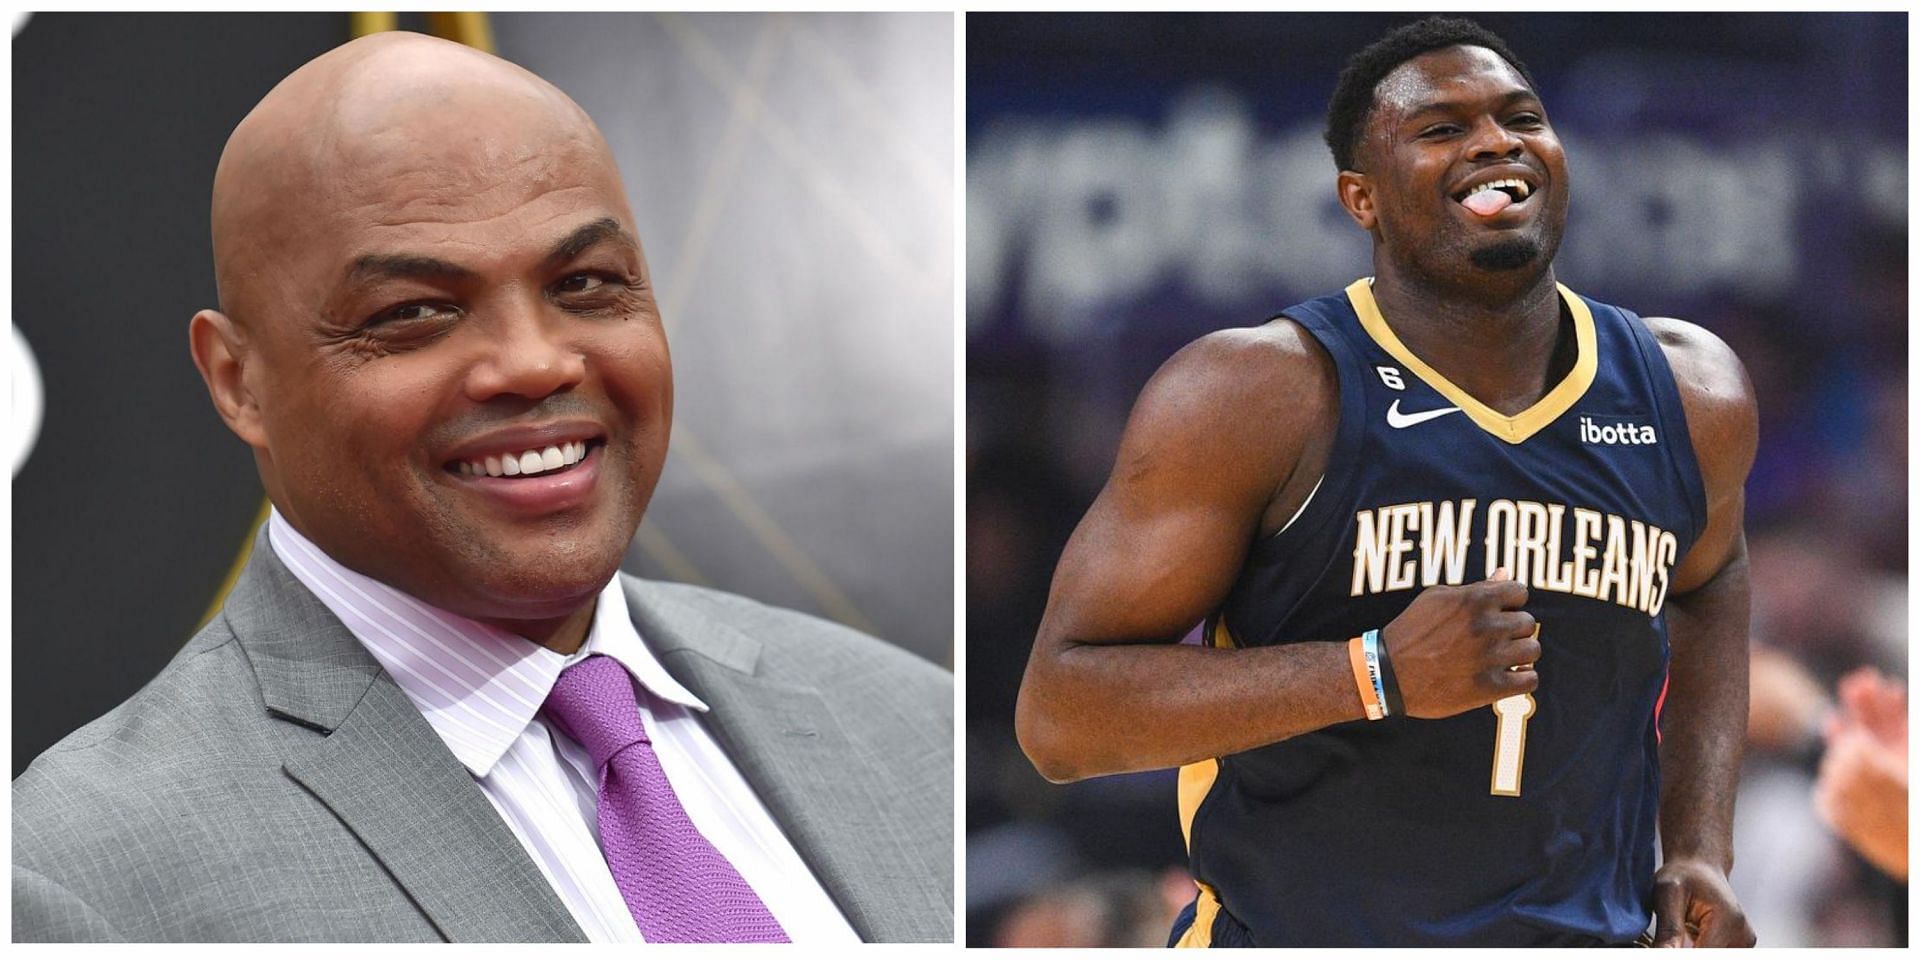 Charles Barkley offered some advice to New Orleans Pelican star Zion Williamson.